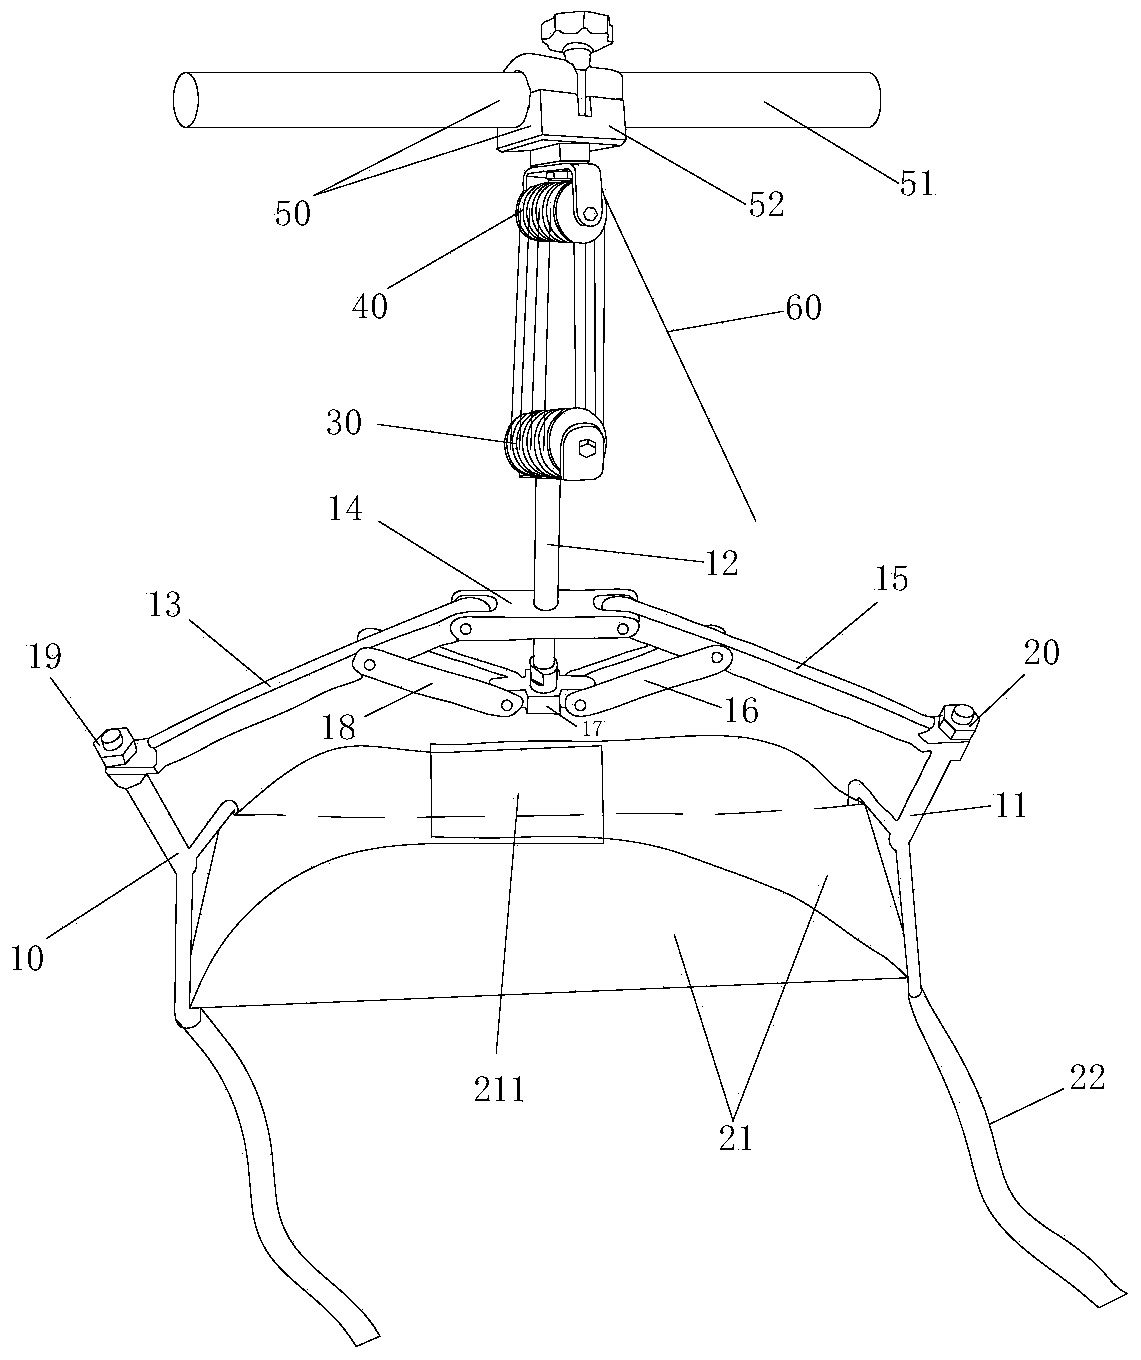 Adjustable thoracolumbar vertebral fracture reduction recovery three-dimensional retractor